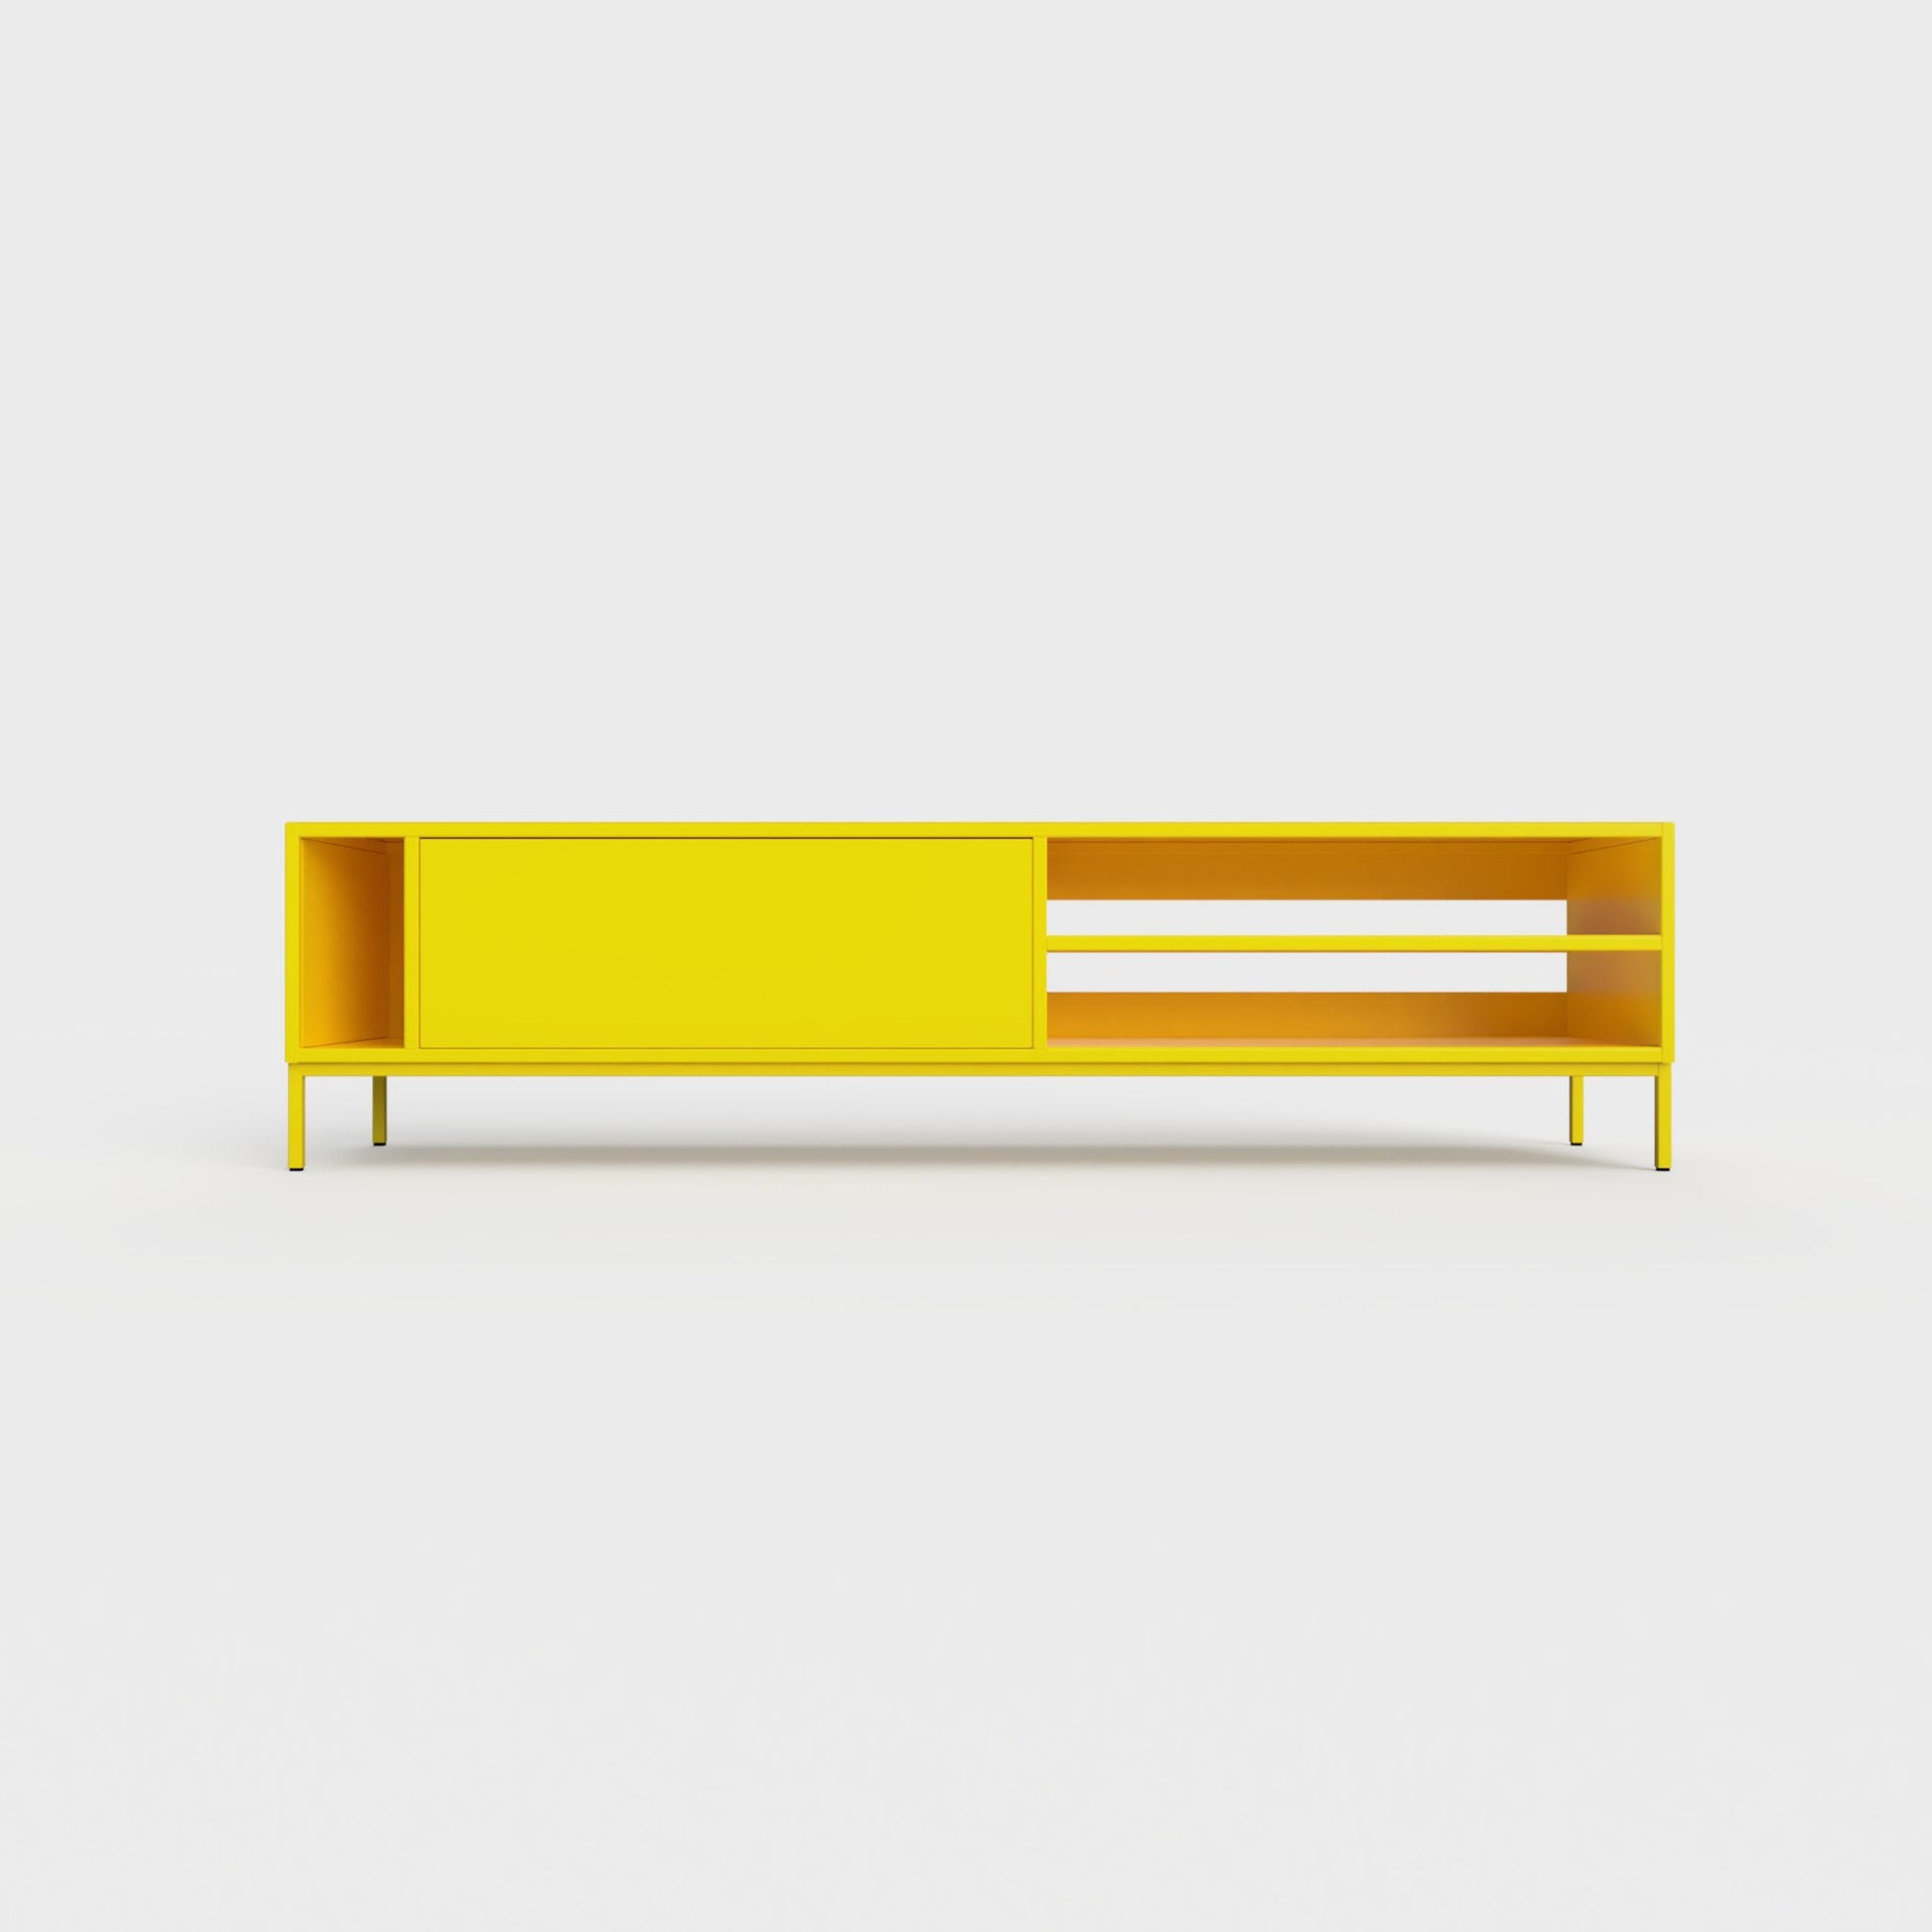 Prunus 03 Lowboard in yellow lemon color, powder-coated steel, elegant and modern piece of furniture for your living room